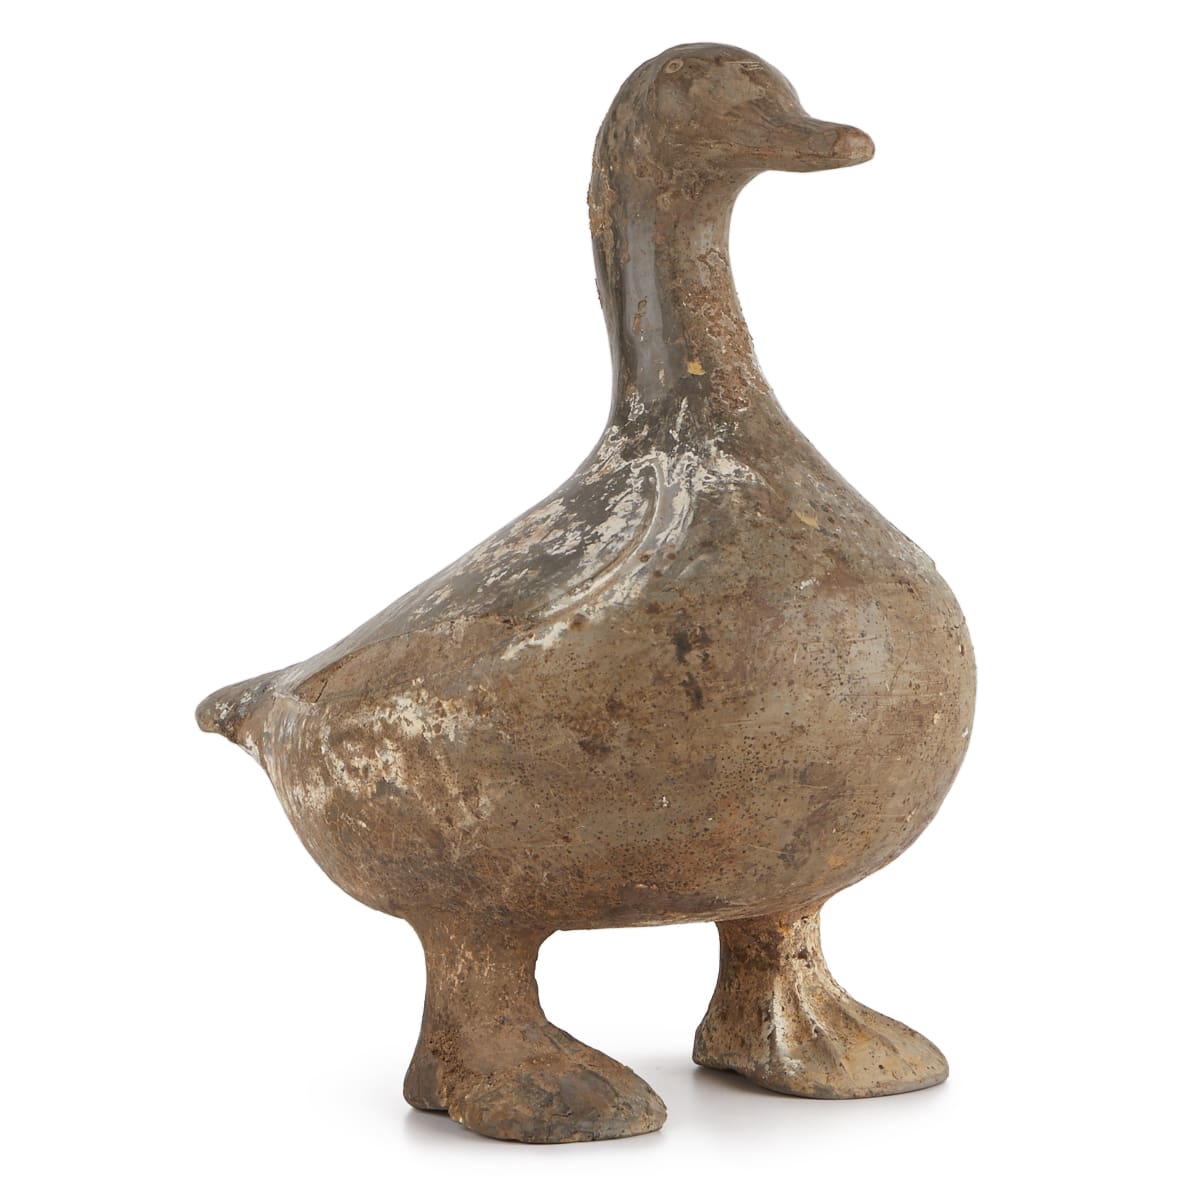 Han Dynasty tomb figure of a duck